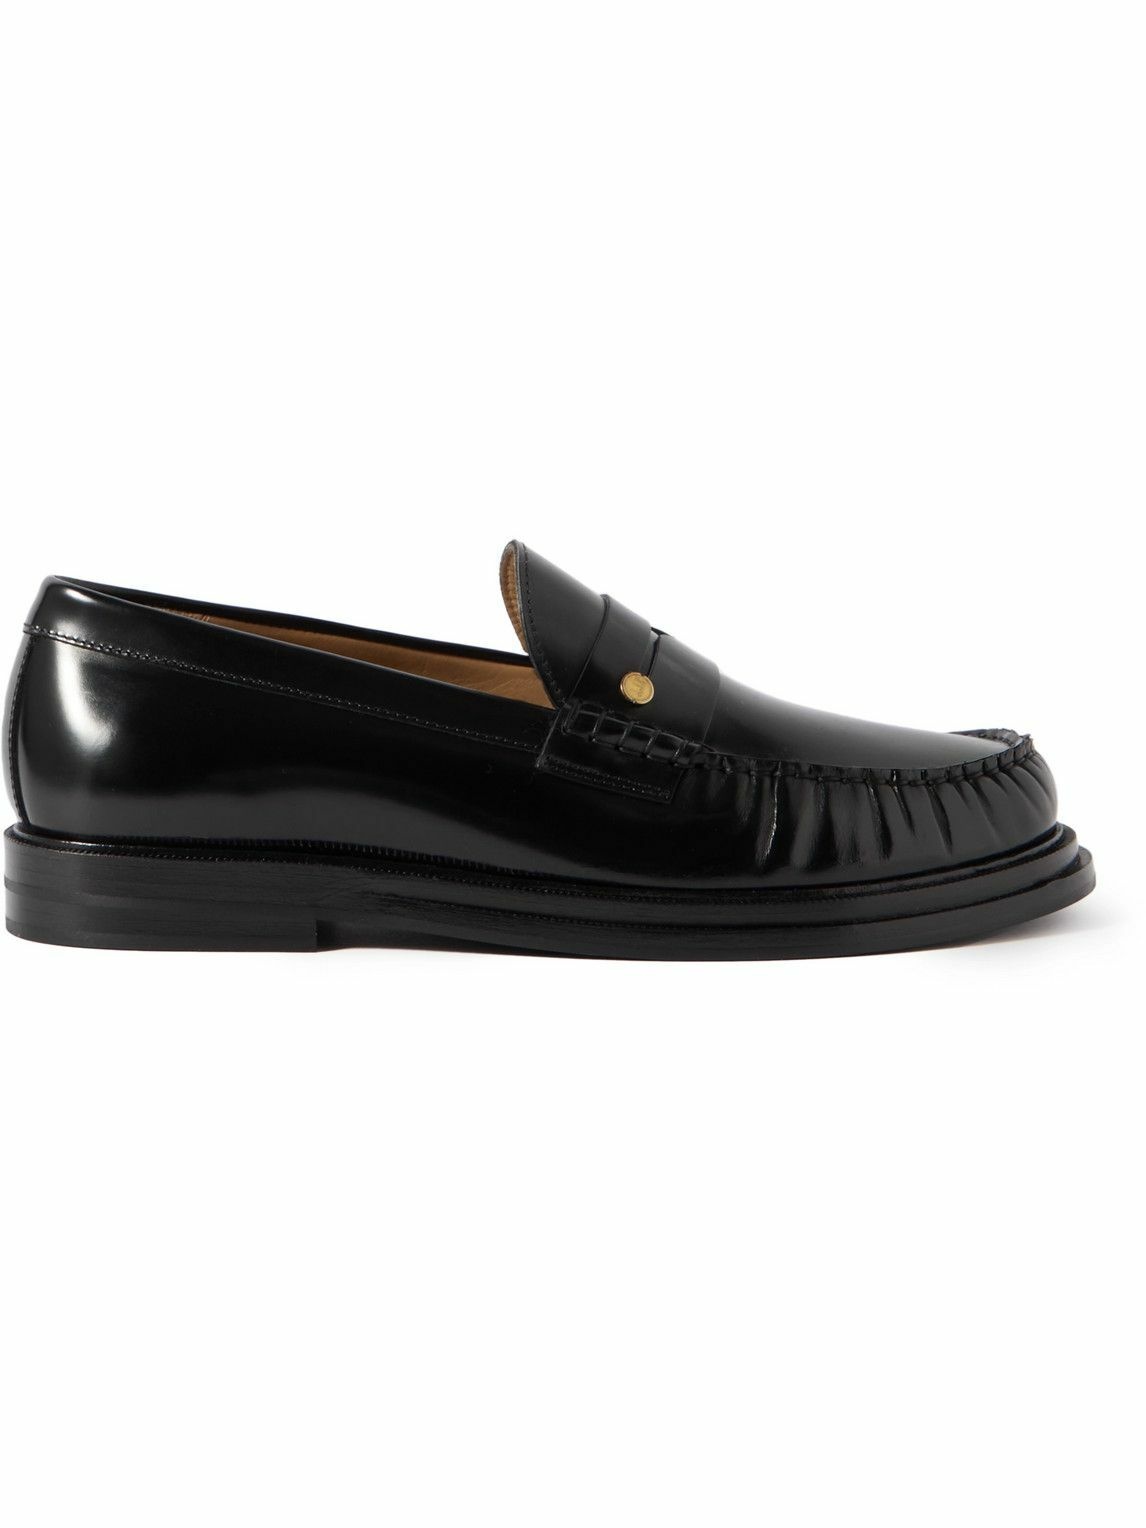 Photo: Dunhill - Rivet Leather Penny Loafers - Black